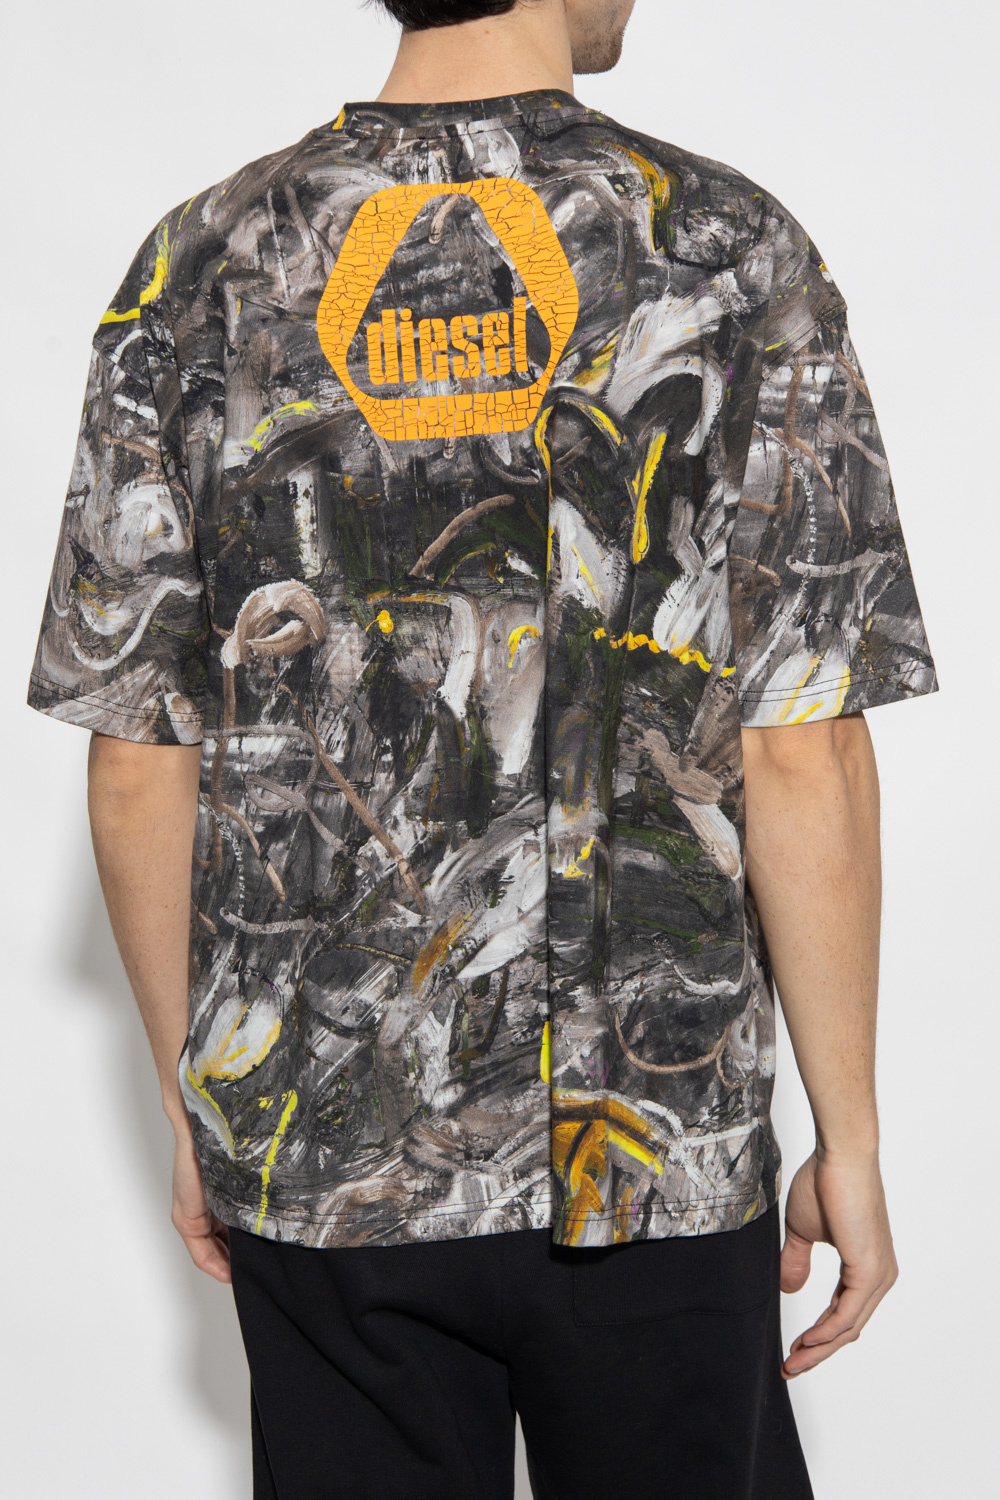 shirt Diesel - Multicolour 'T - Keep things refined with this grey